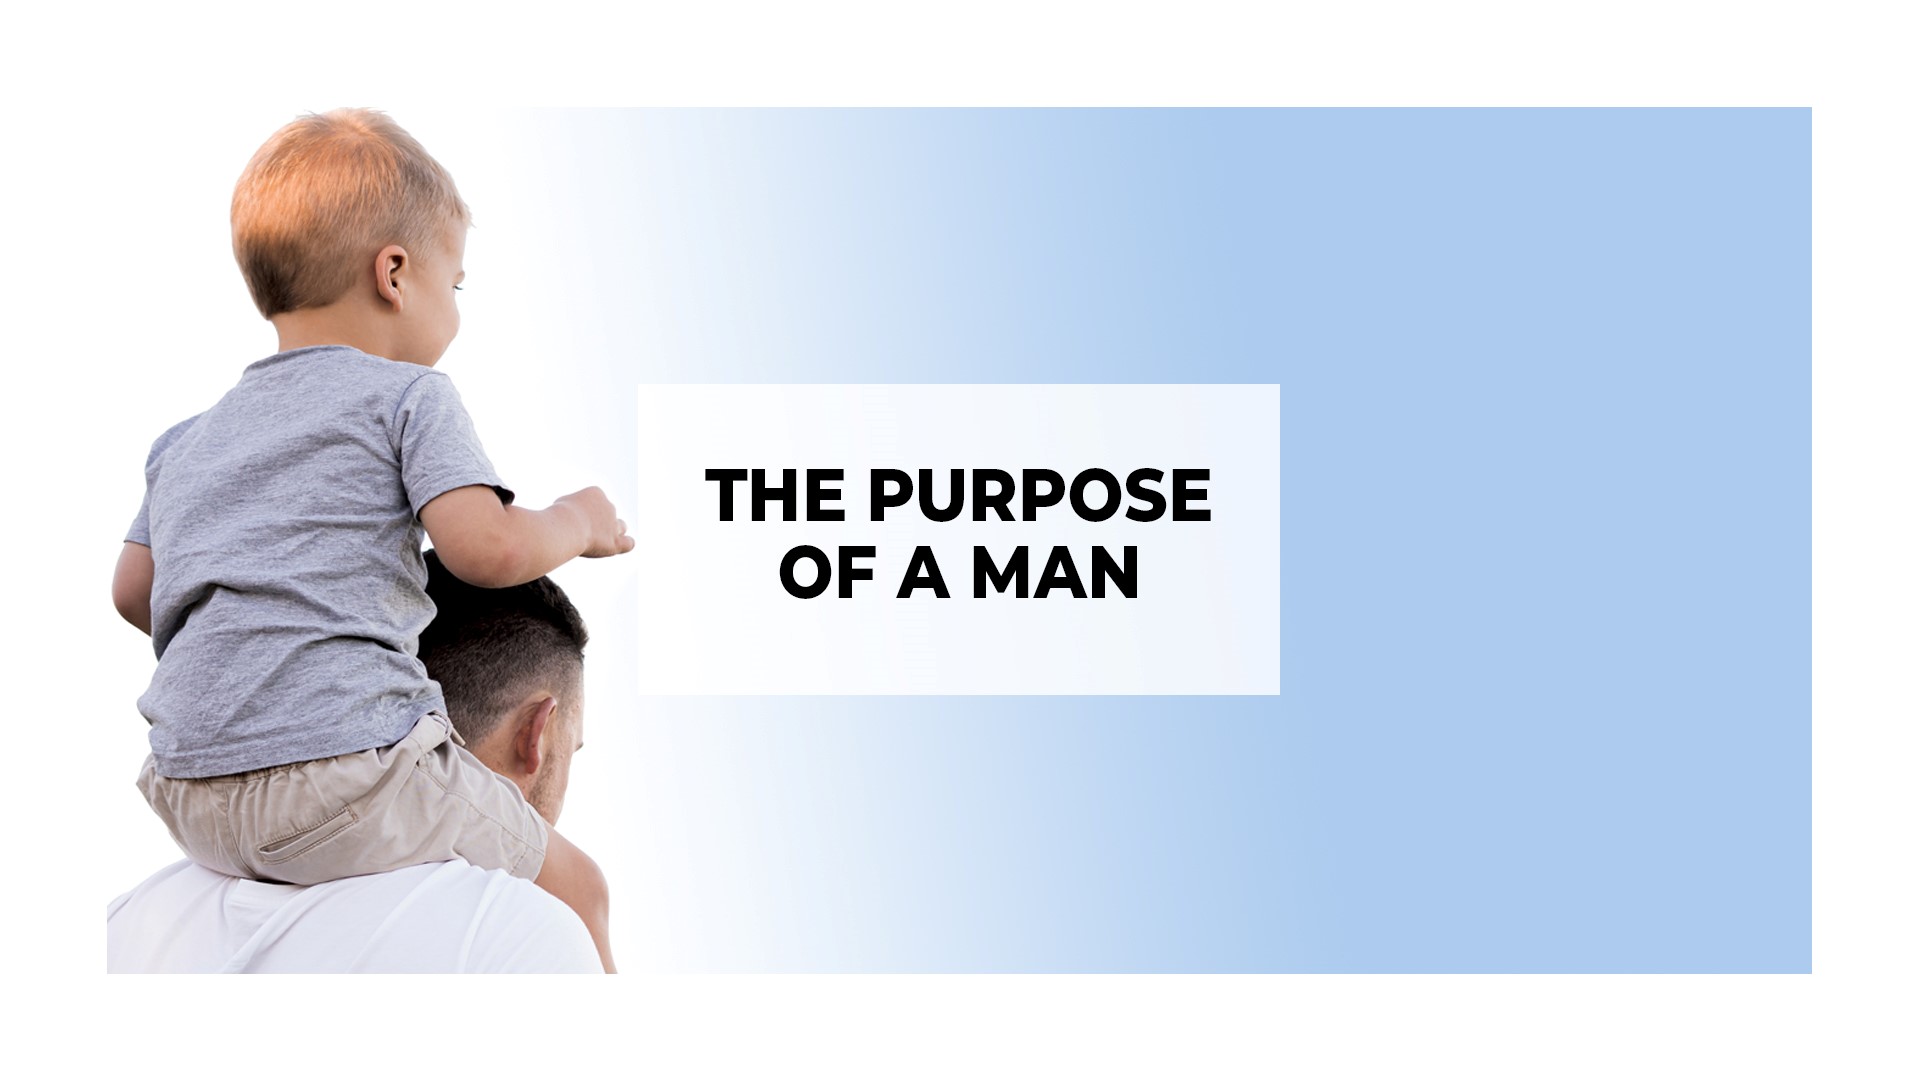 The Purpose of a Man